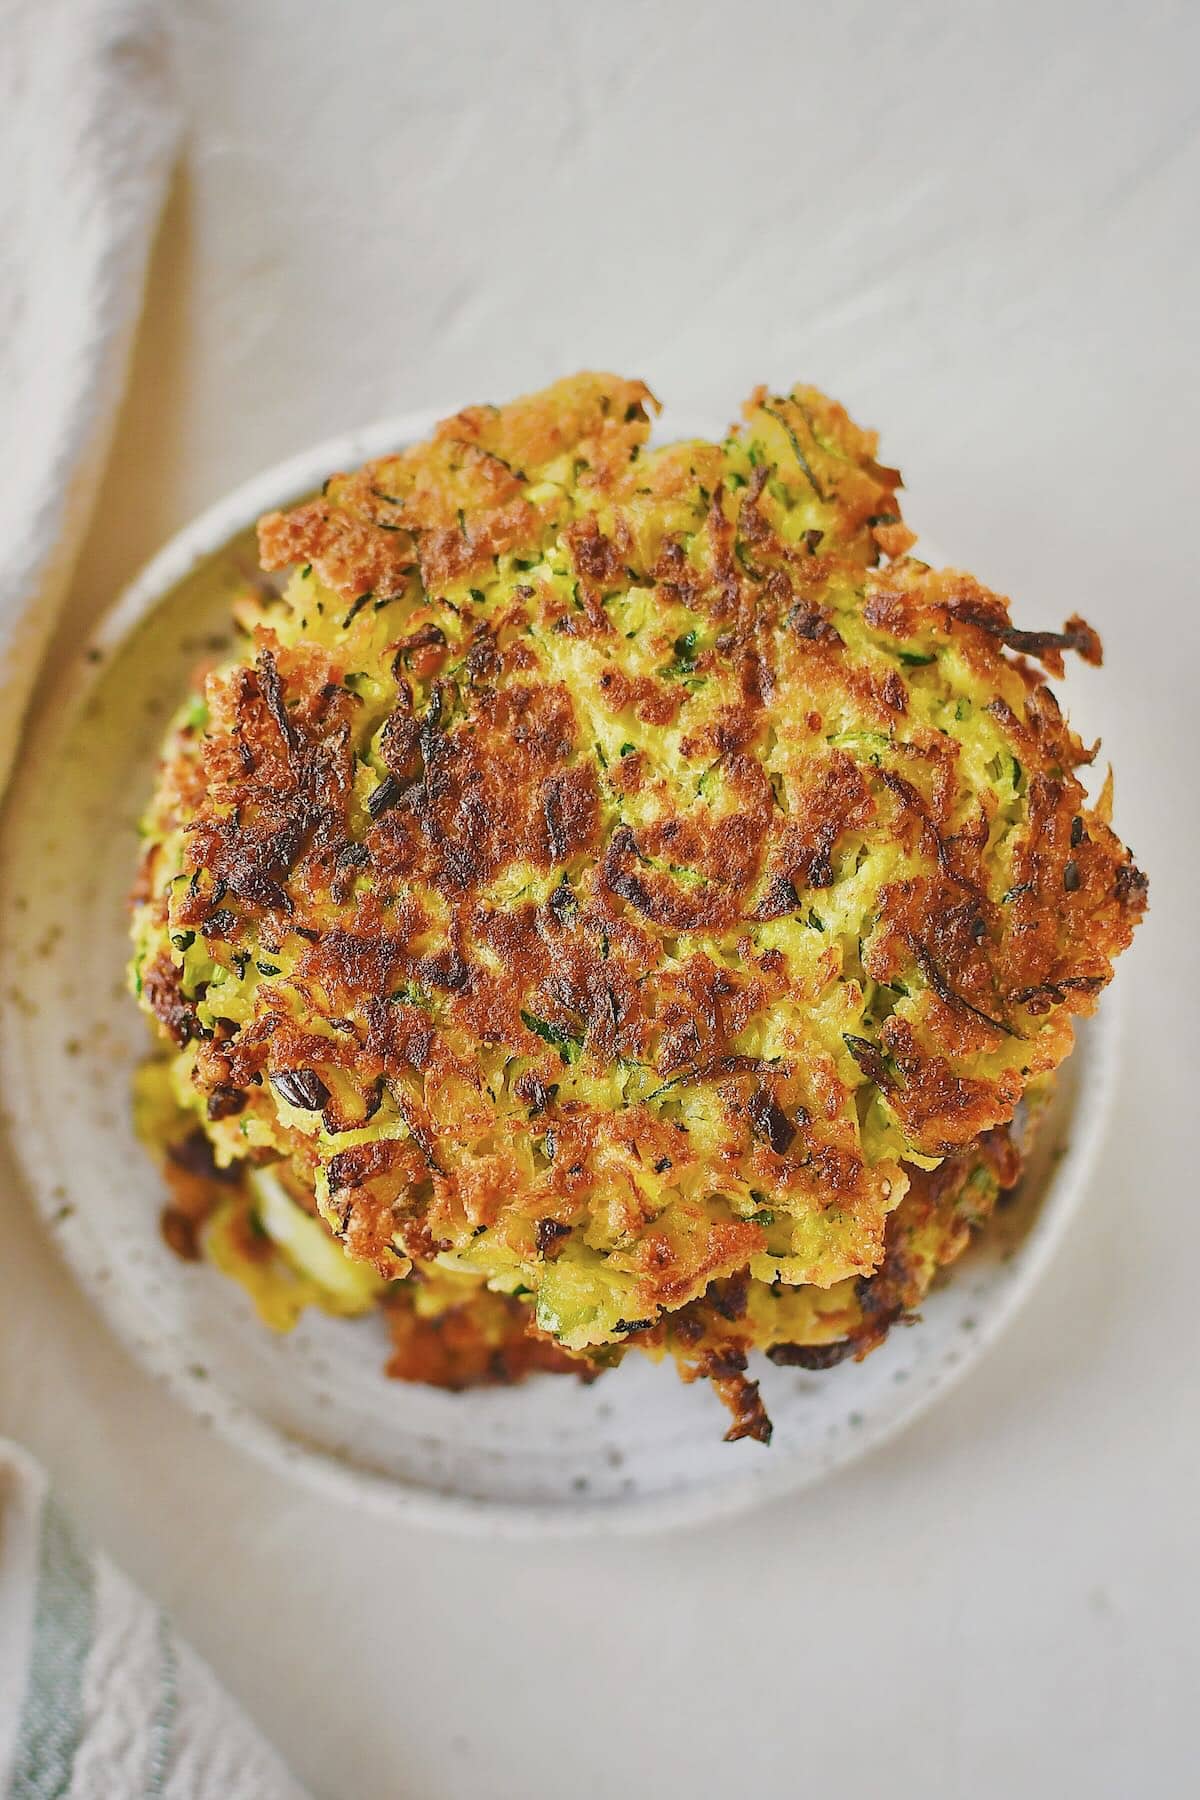 Crispy golden zucchini fritters ready to be devoured.